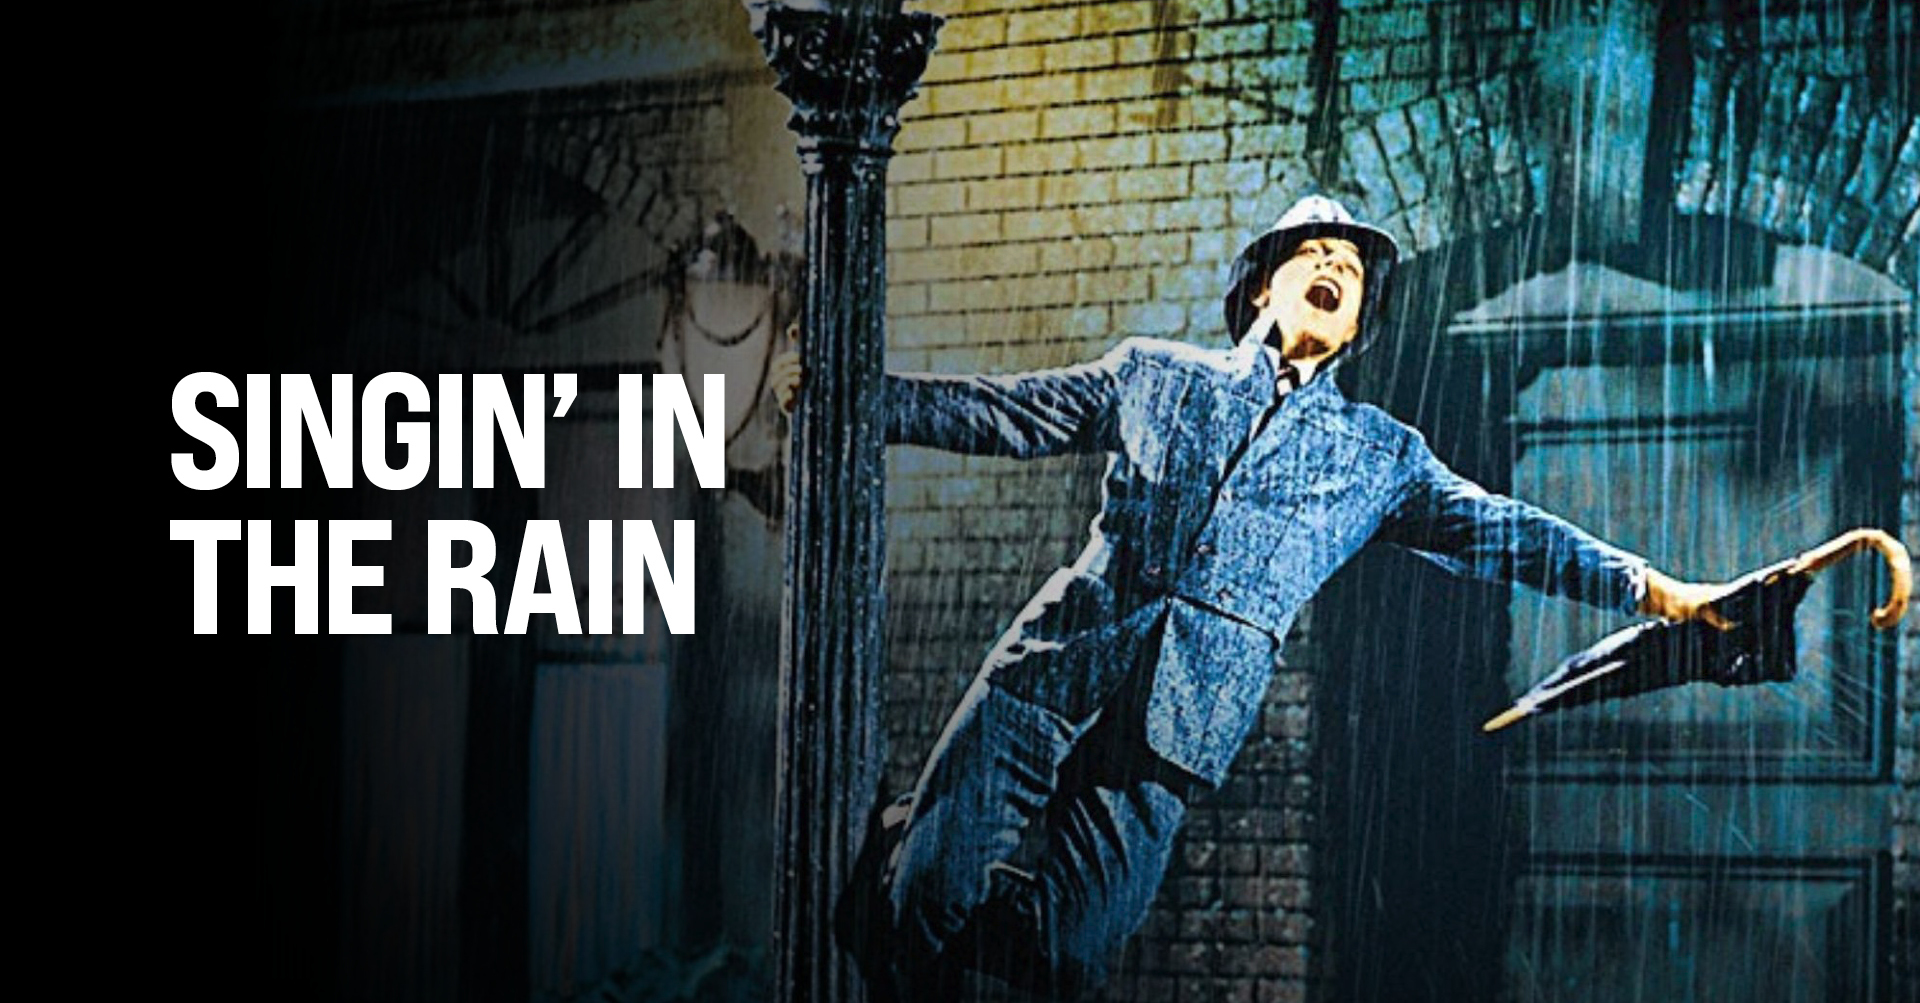 45-facts-about-the-movie-singin-in-the-rain